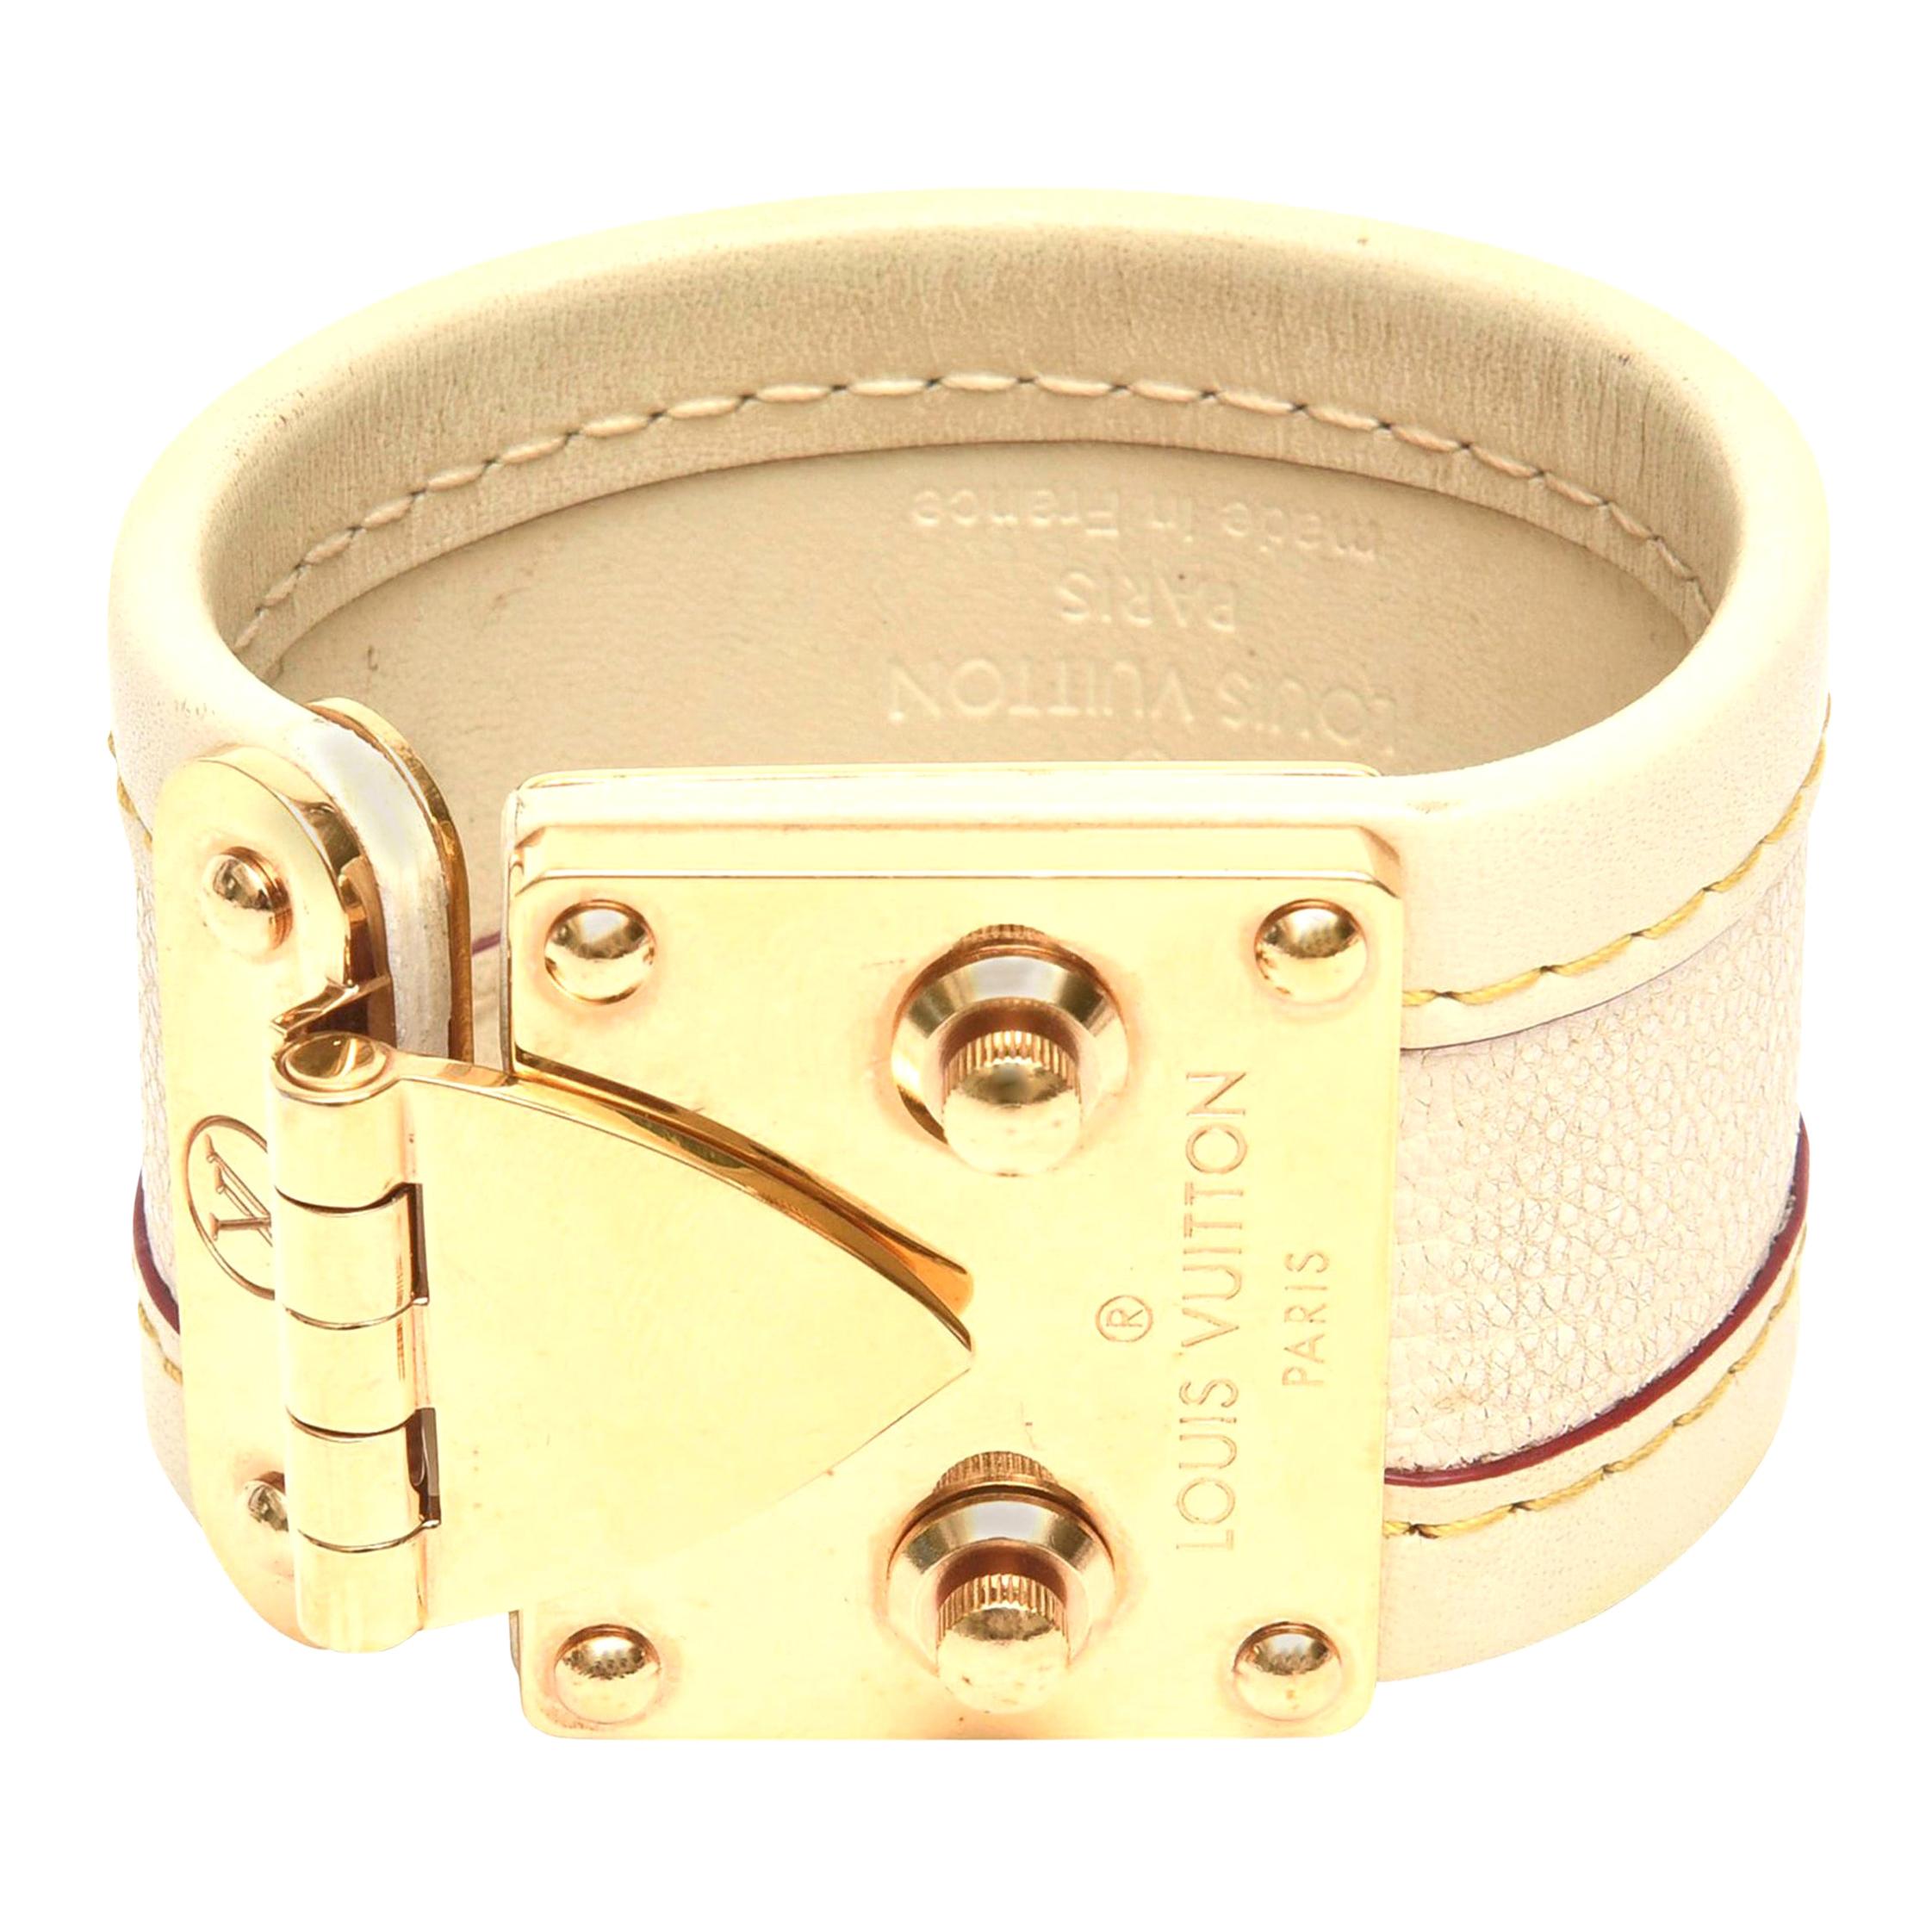 This iconic cuff bracelet by Louis Vuitton is beige stitched leather with beautiful  gold plated brass hardware class and closures. Signed Louis Vuitton Paris on the brass hardware closure. Fits snug to the wrist of one that is of small wrist like a